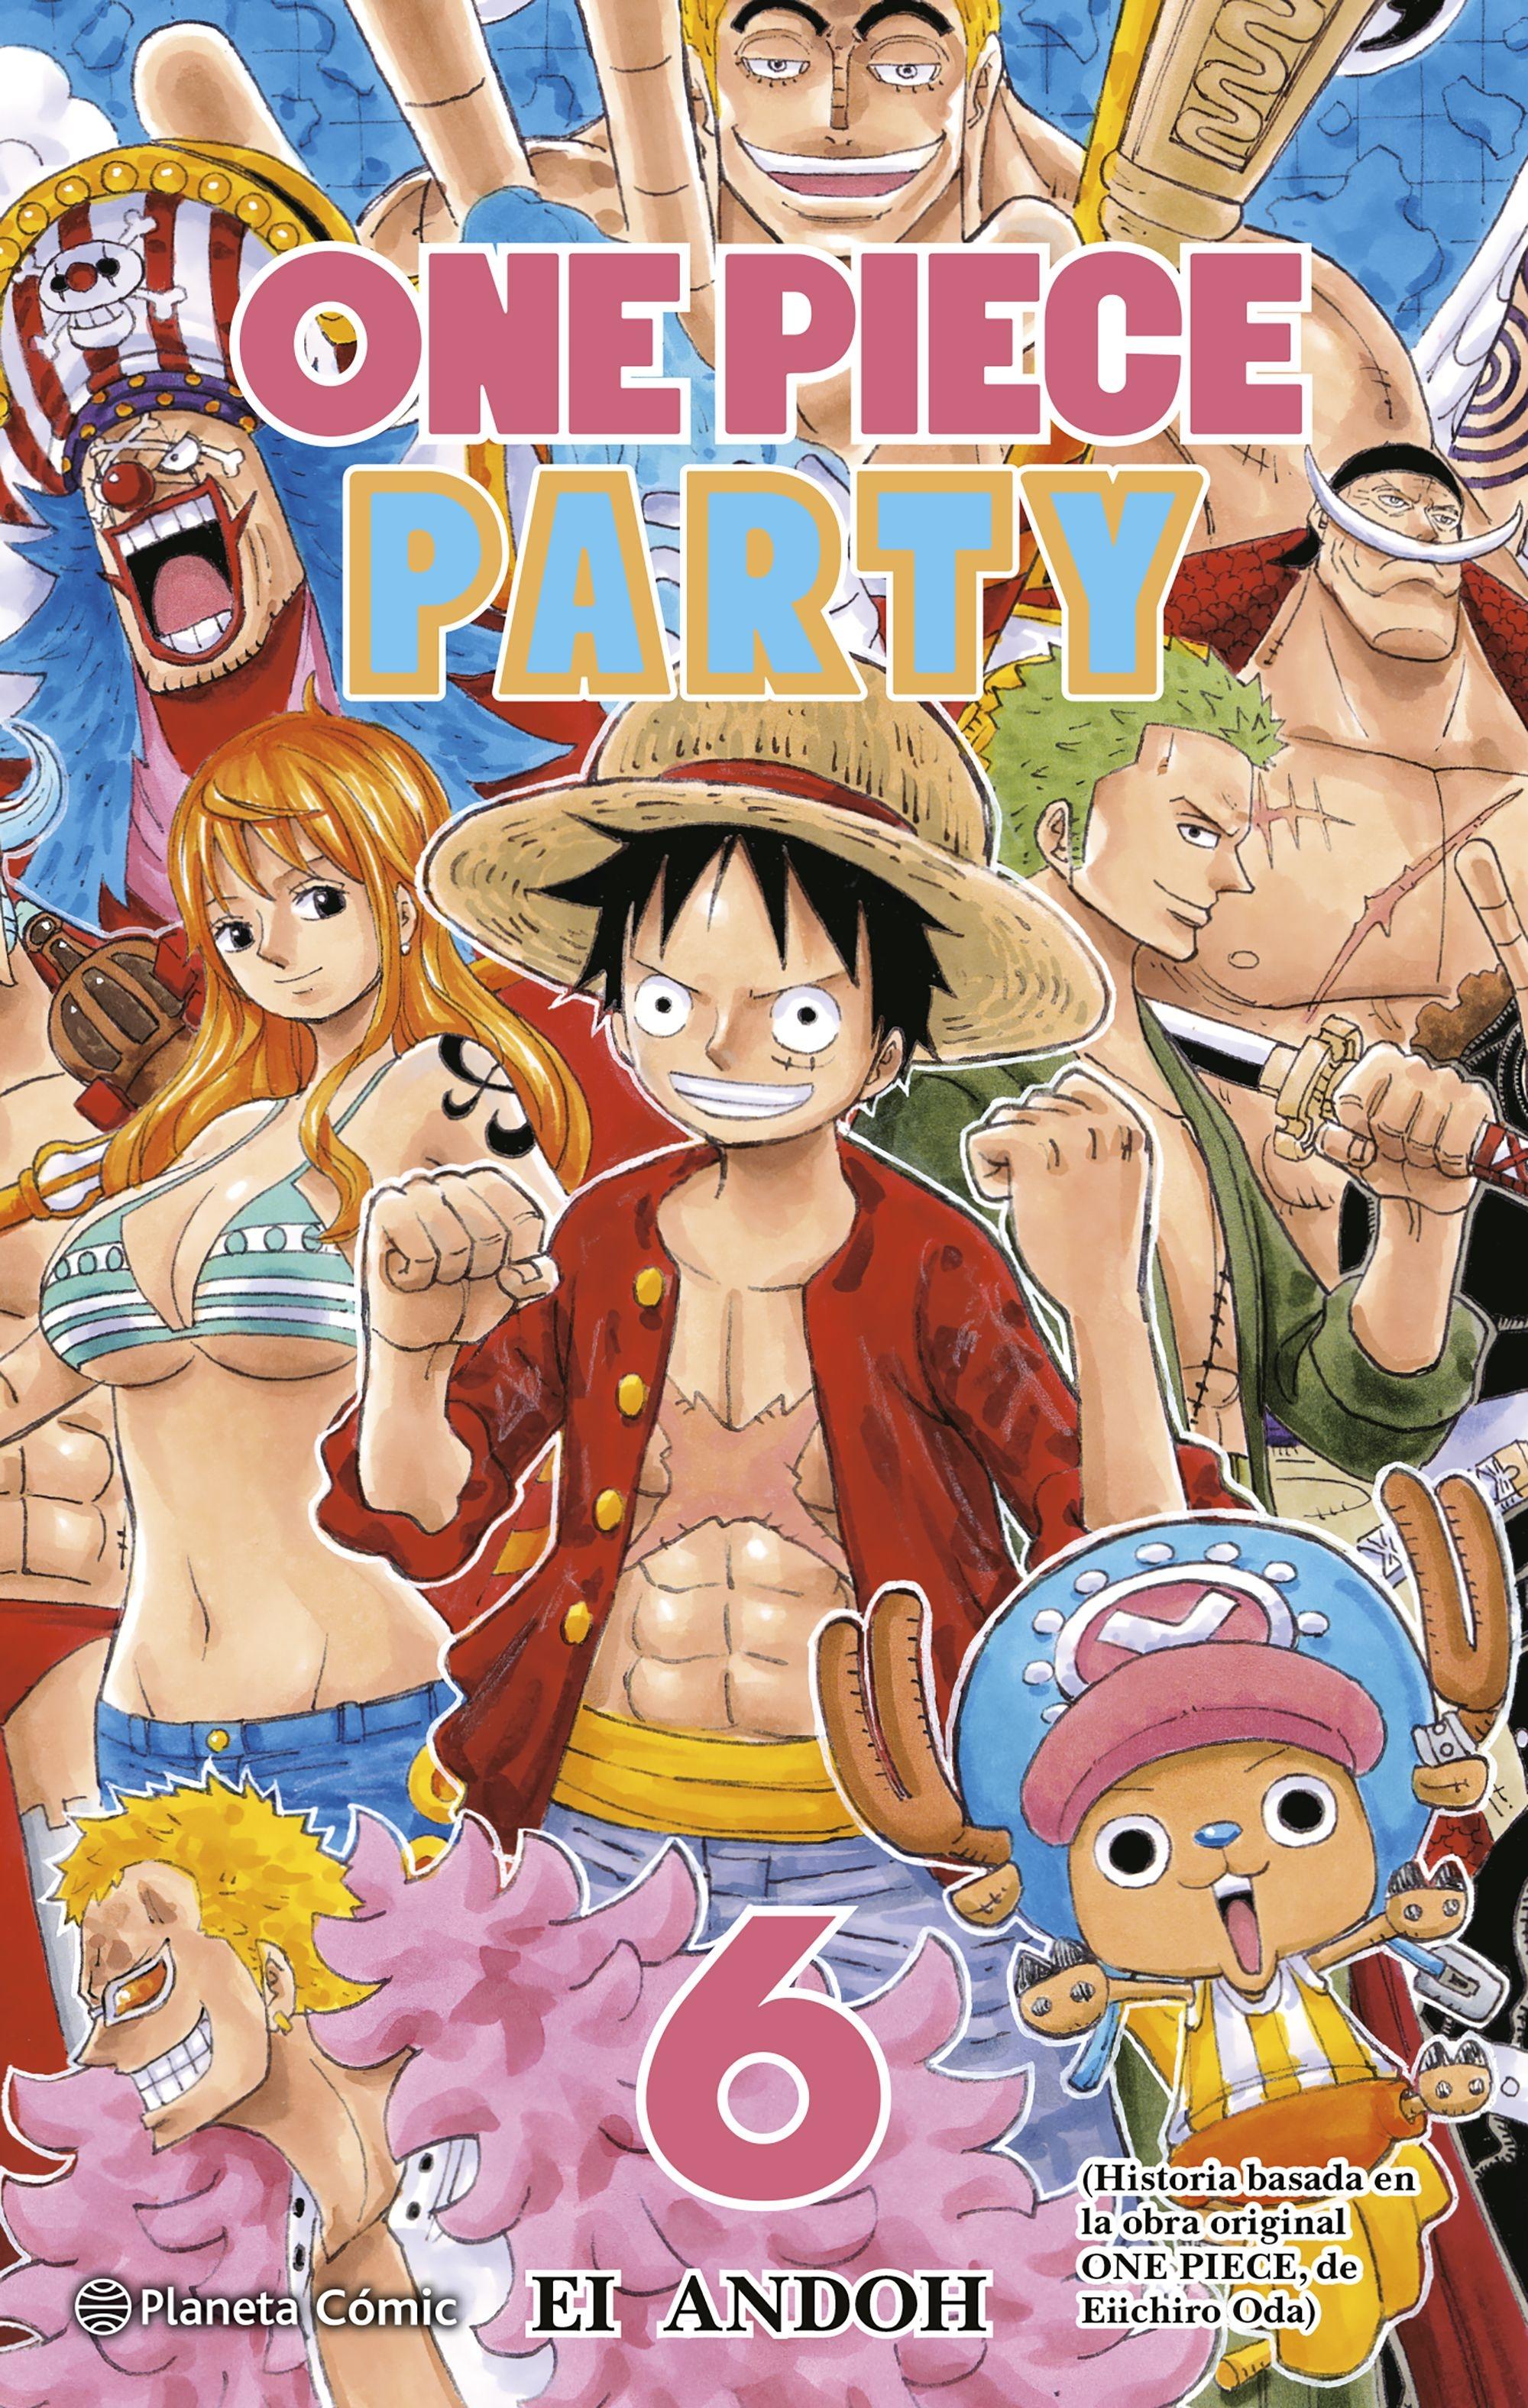 One Piece Party Nº 06/07 "Ei Andoh"